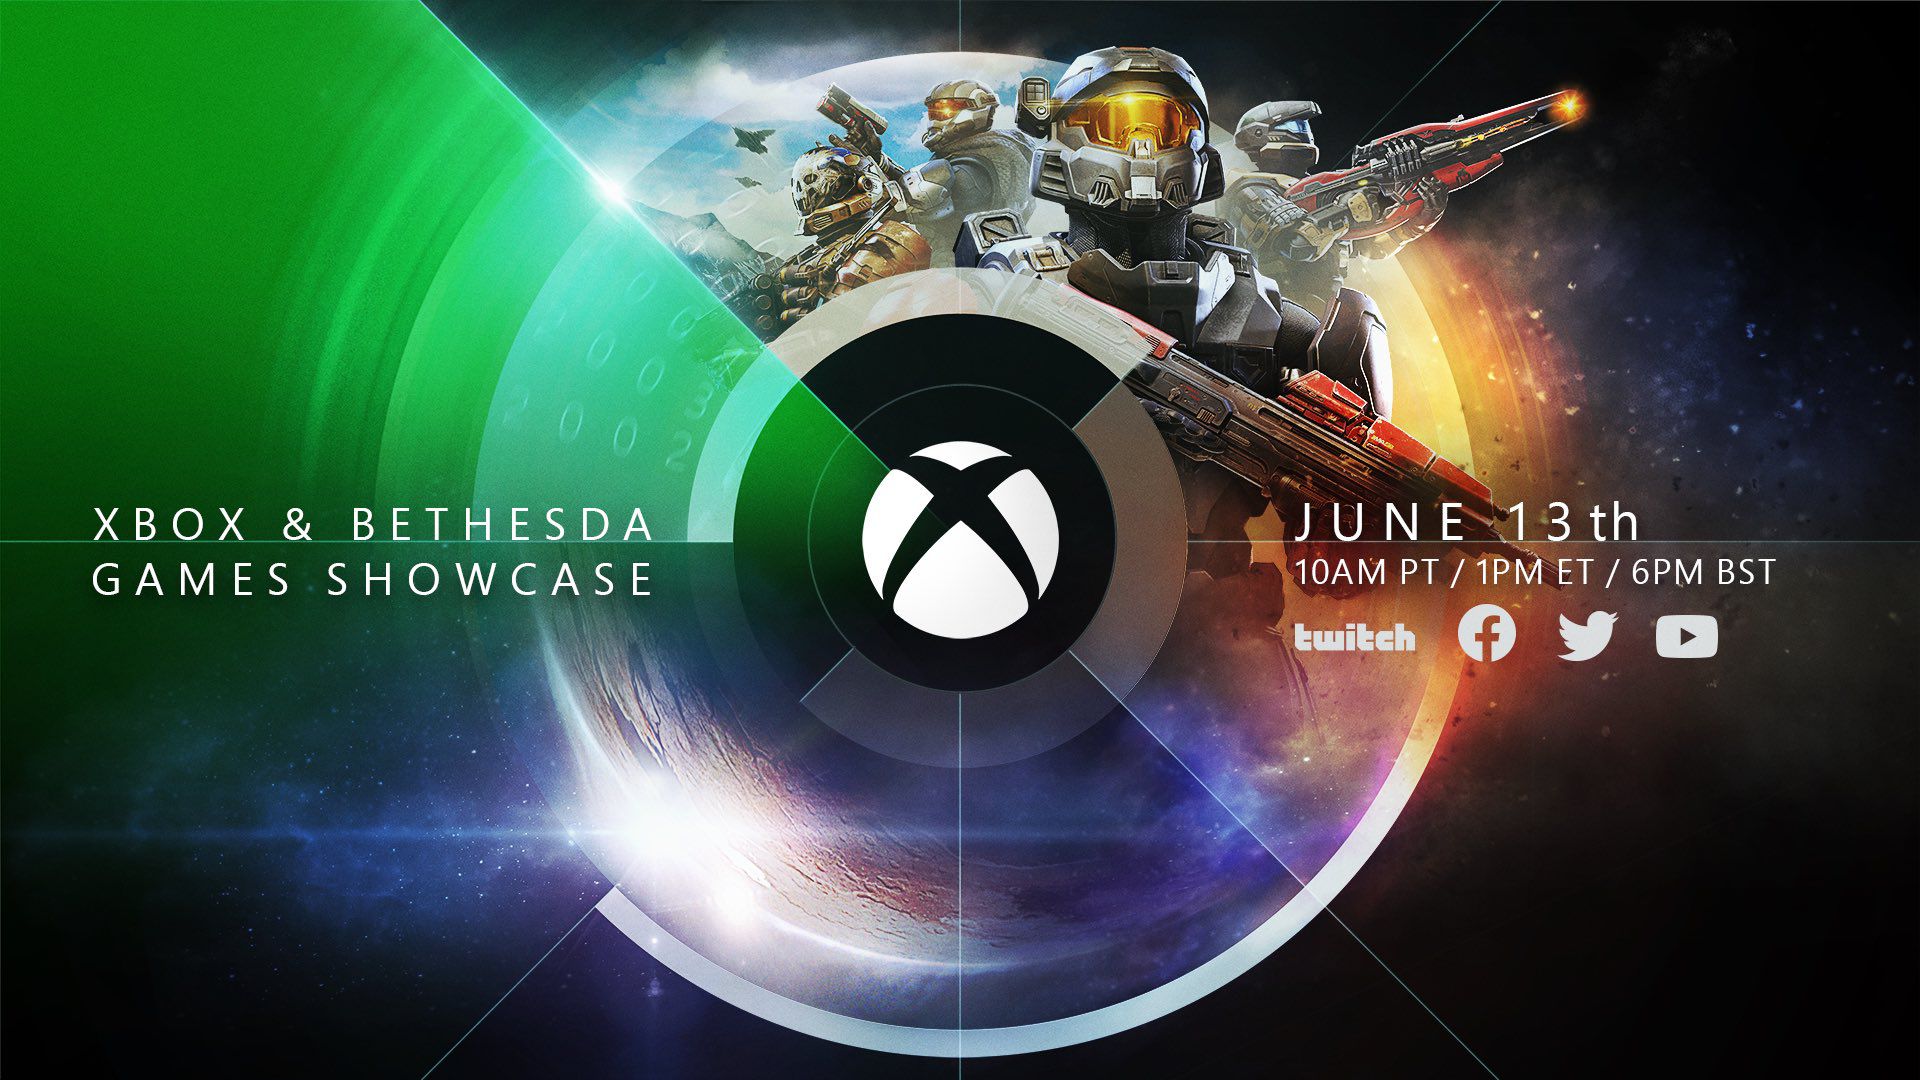 Xbox on E3 with a 90-minute show on June 13th